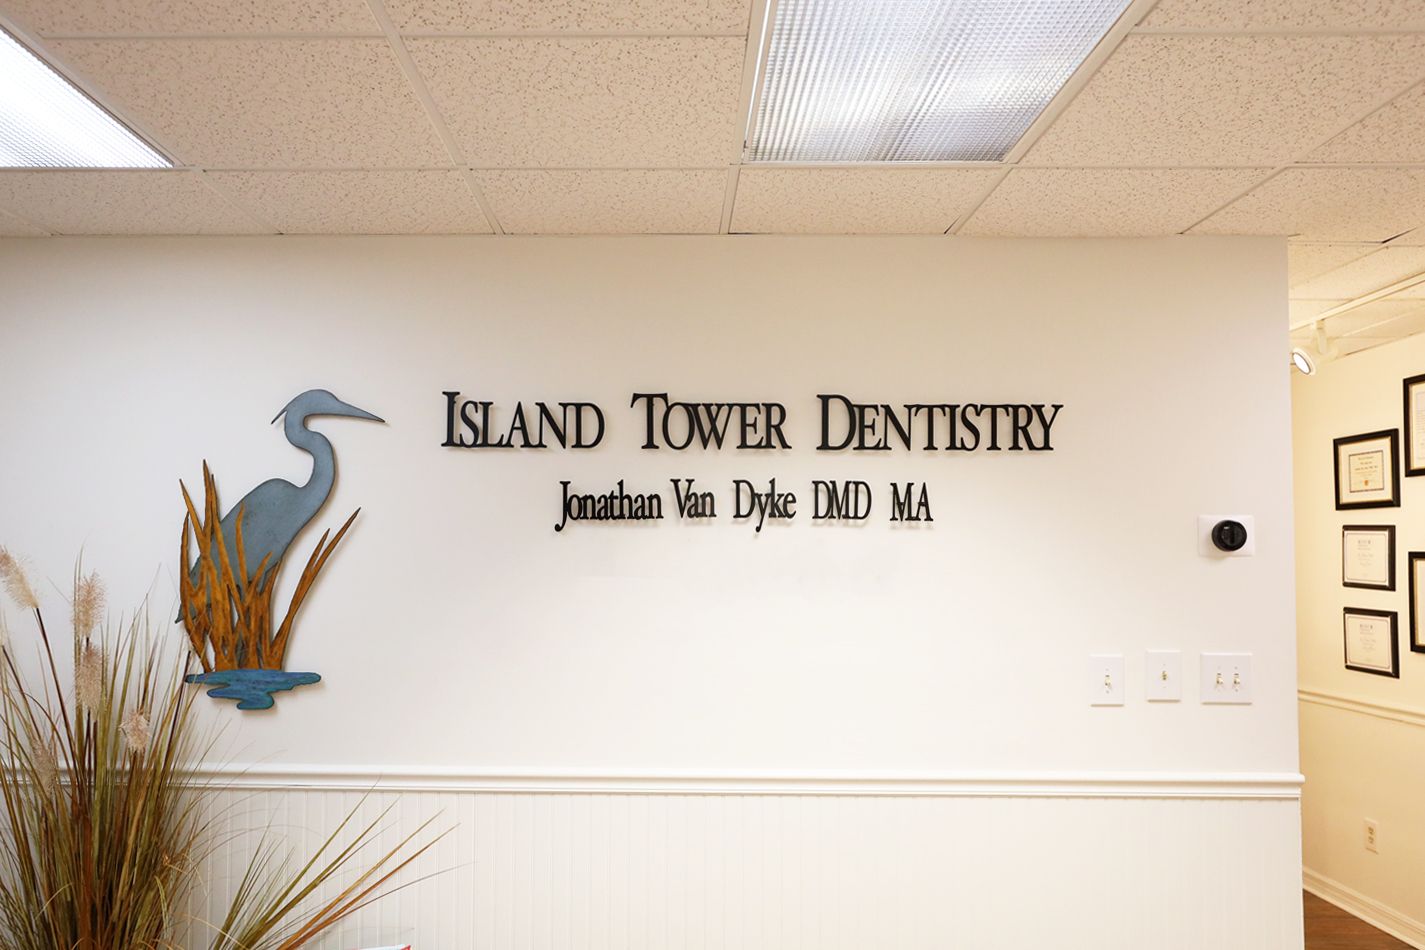 Island Tower Dentistry sign